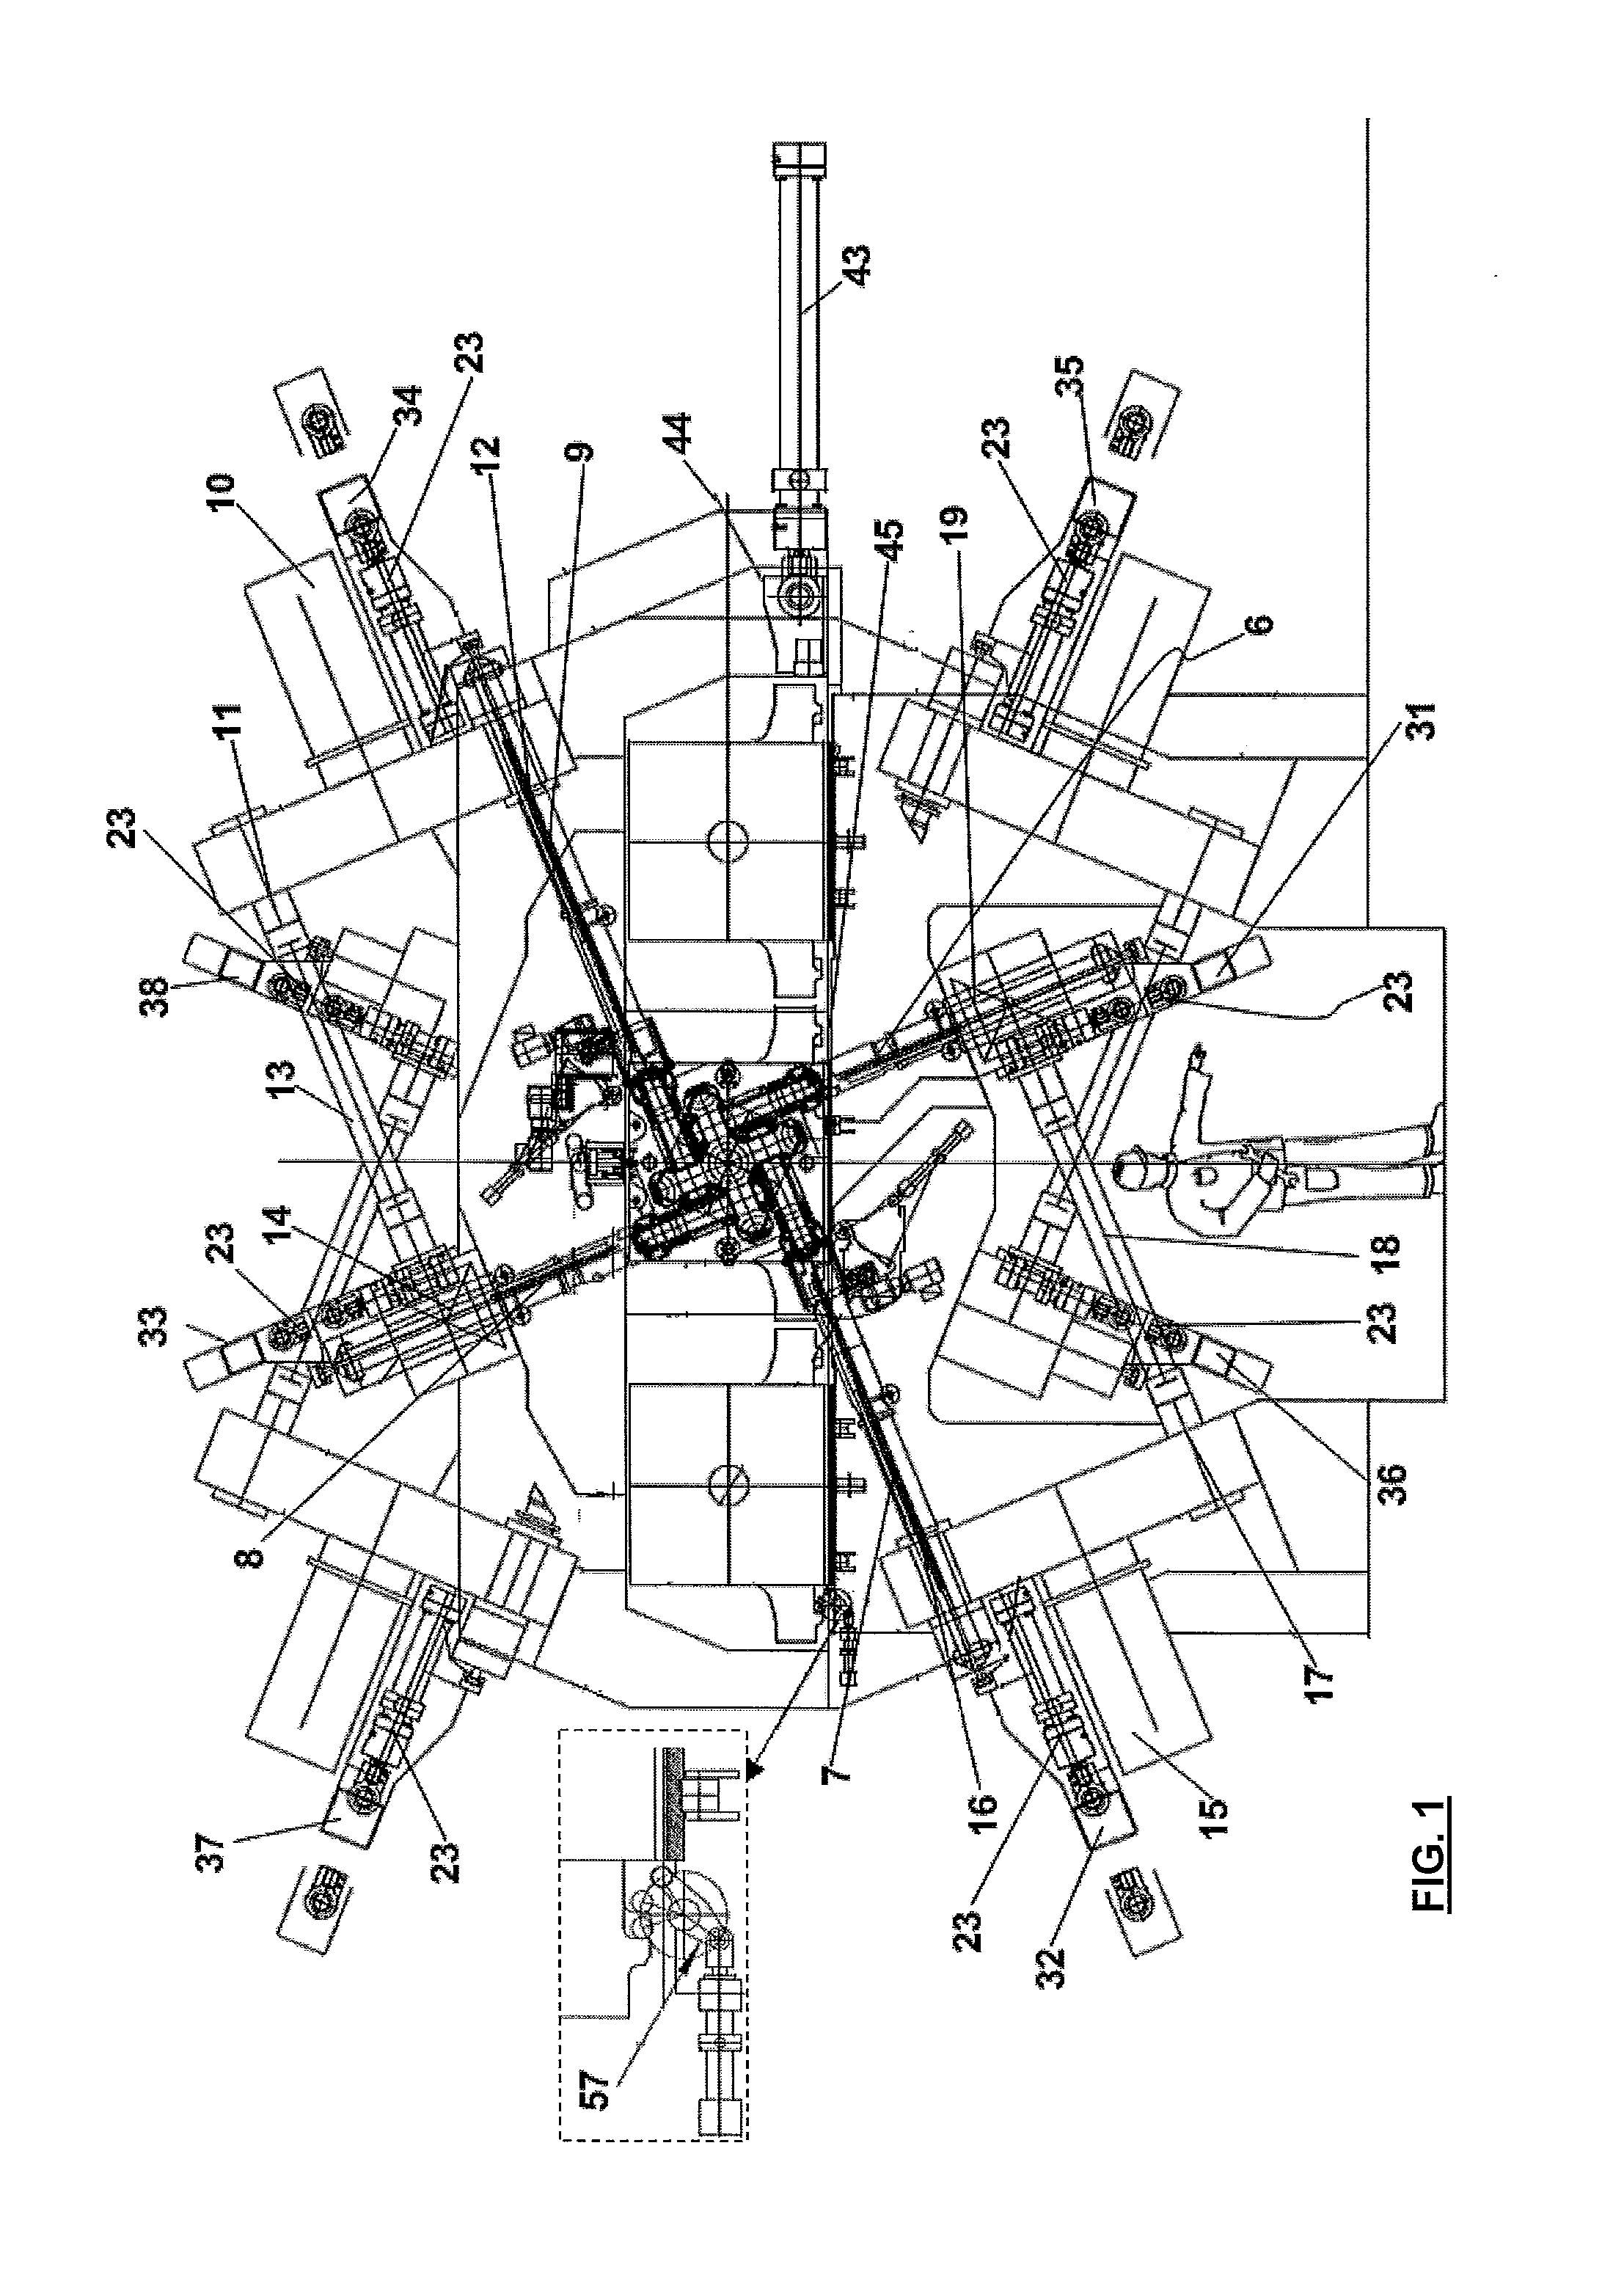 Multi-stand rolling mill of the longitudinal elongator kind for rod-shaped bodies, comprising four-rolls stands, and method for substituting the stands